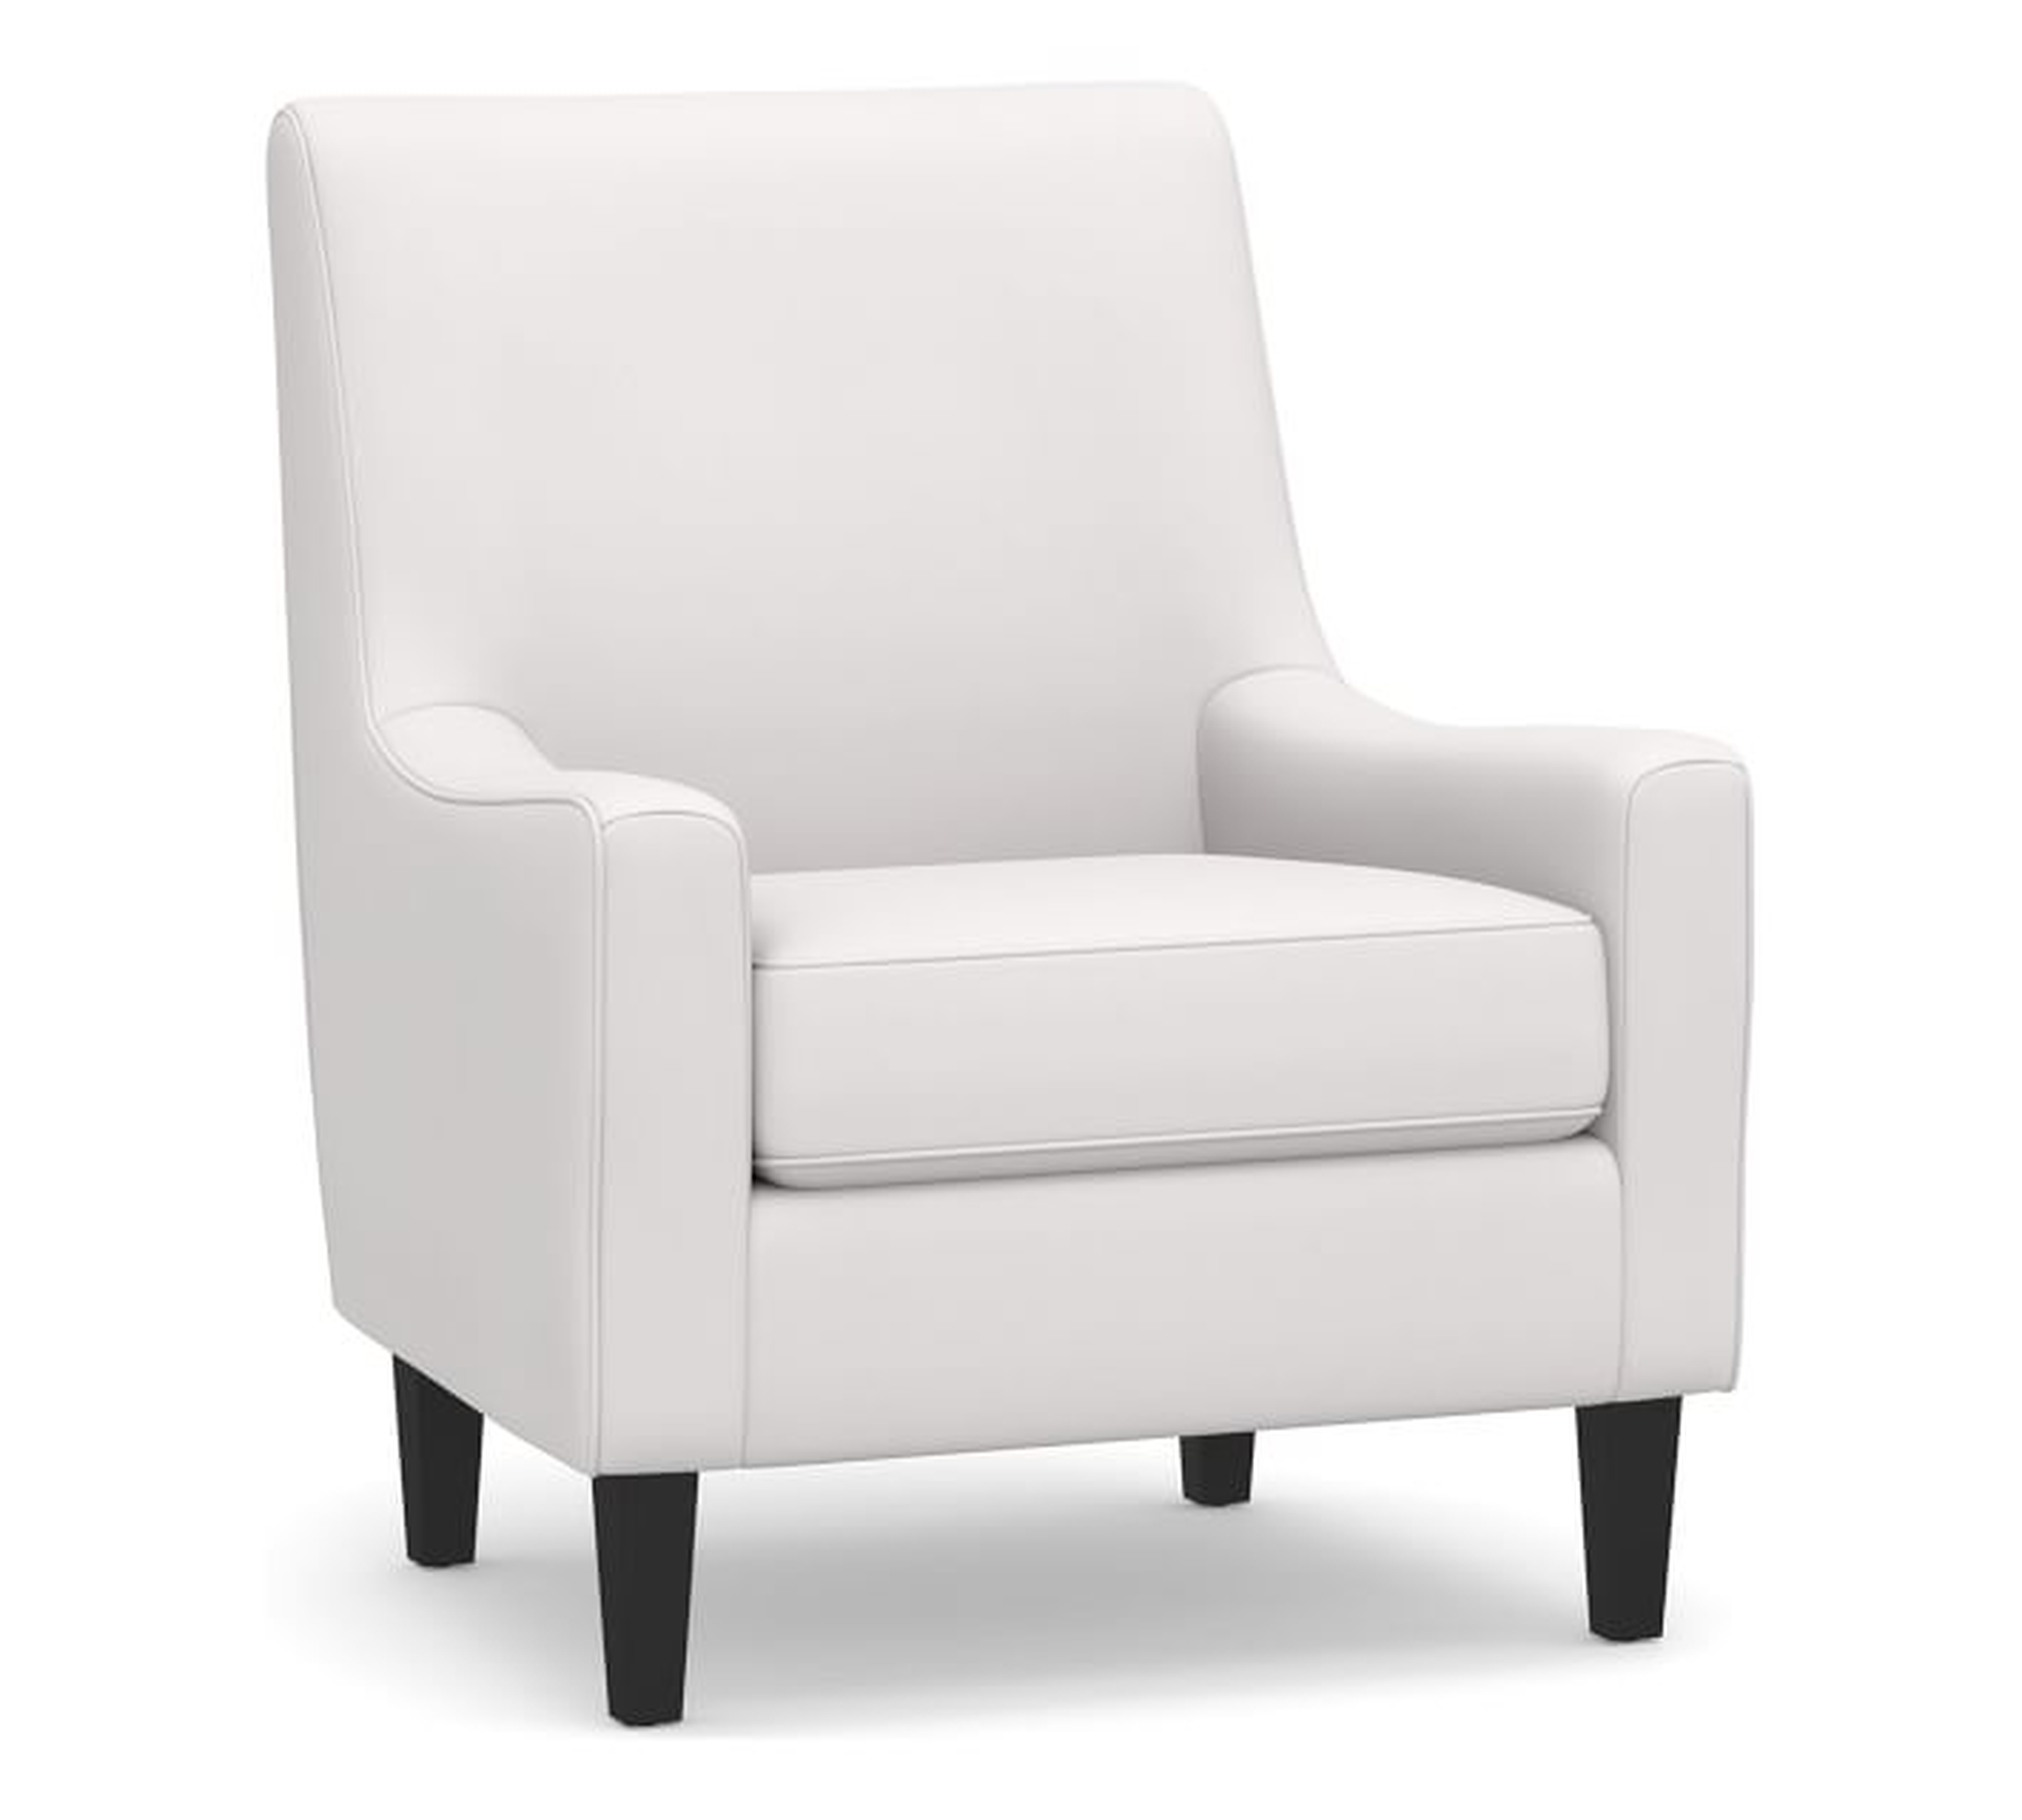 SoMa Isaac Upholstered Armchair, Polyester Wrapped Cushions, Twill White - Pottery Barn